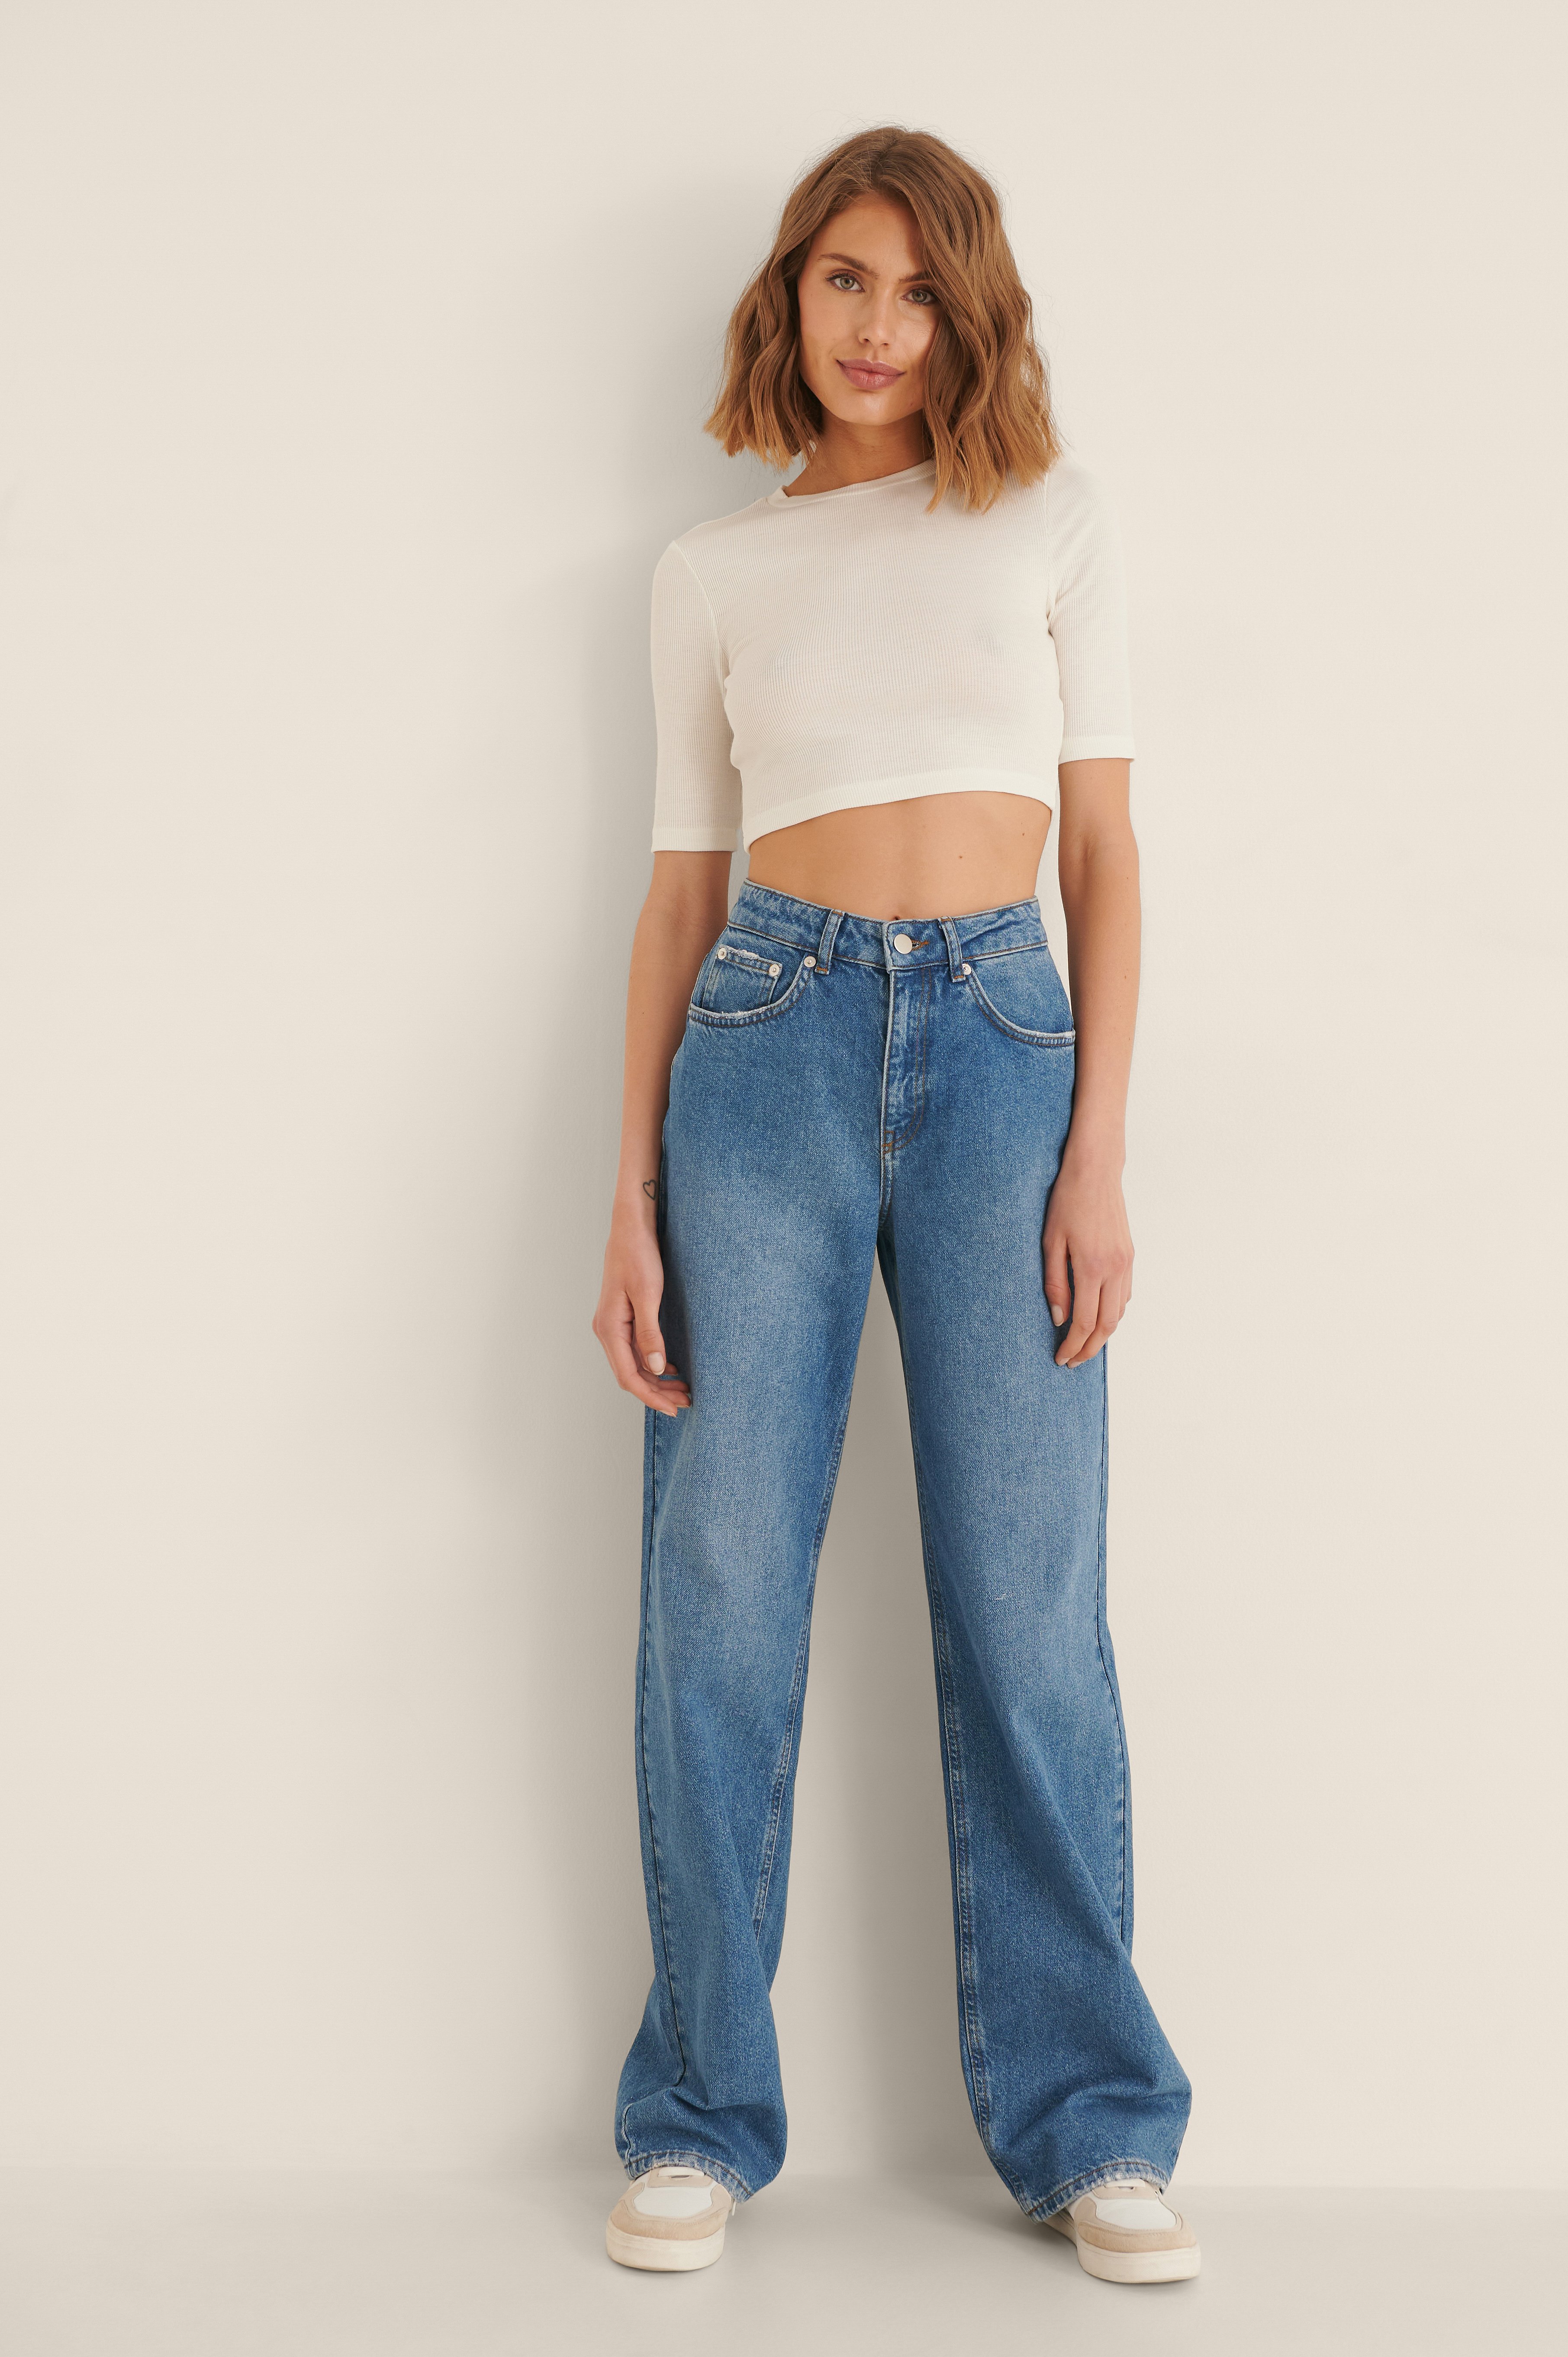 Offwhite Round Neck Ribbed Crop Top